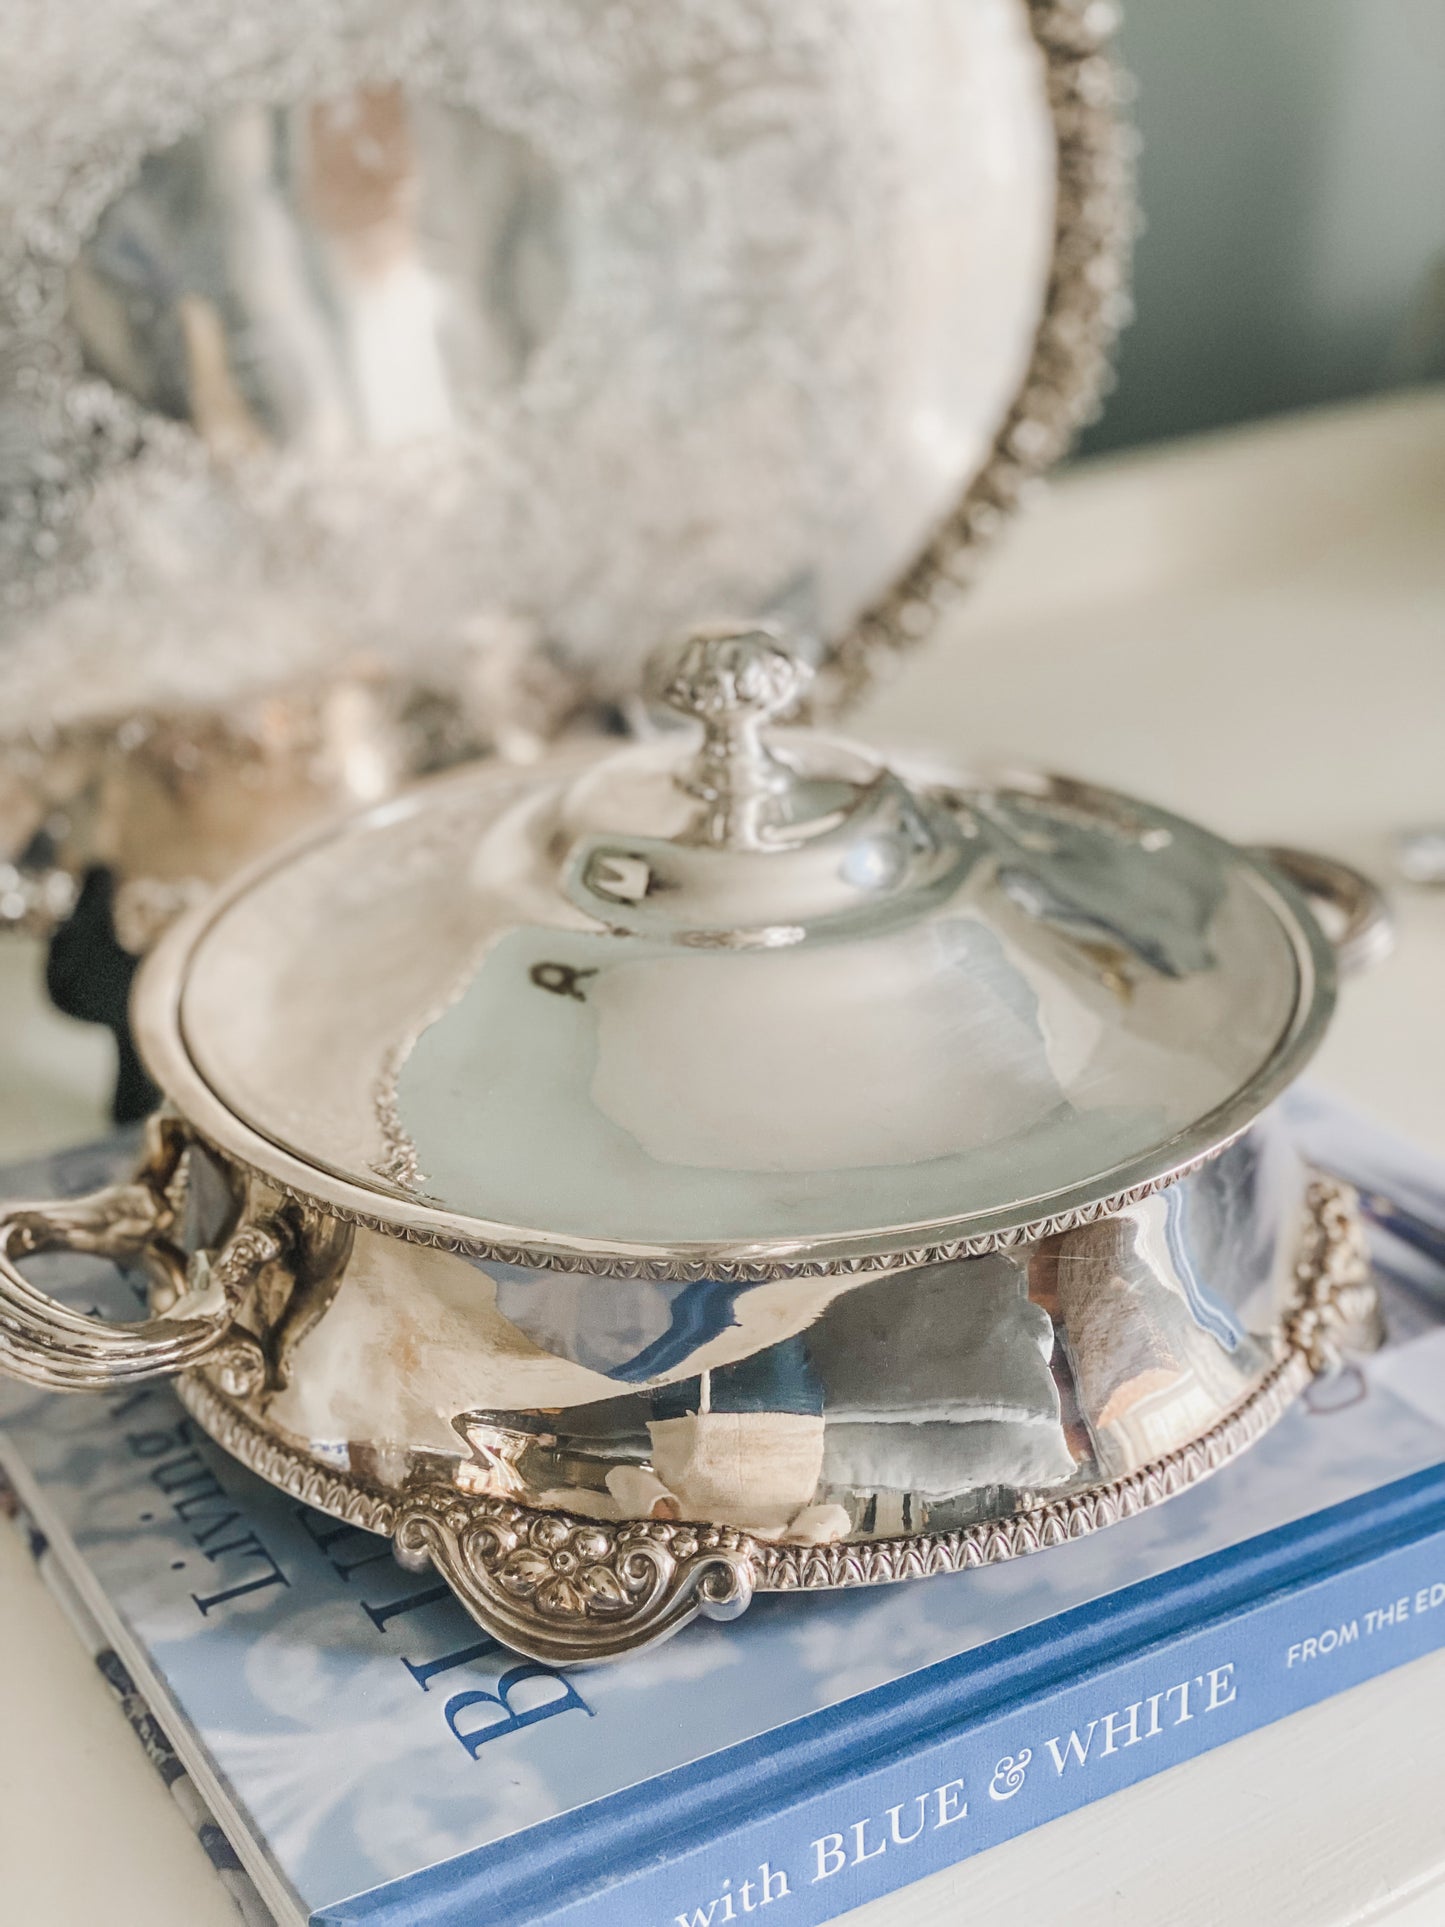 Exquisite Antique Silver Covered Dish - 1800's